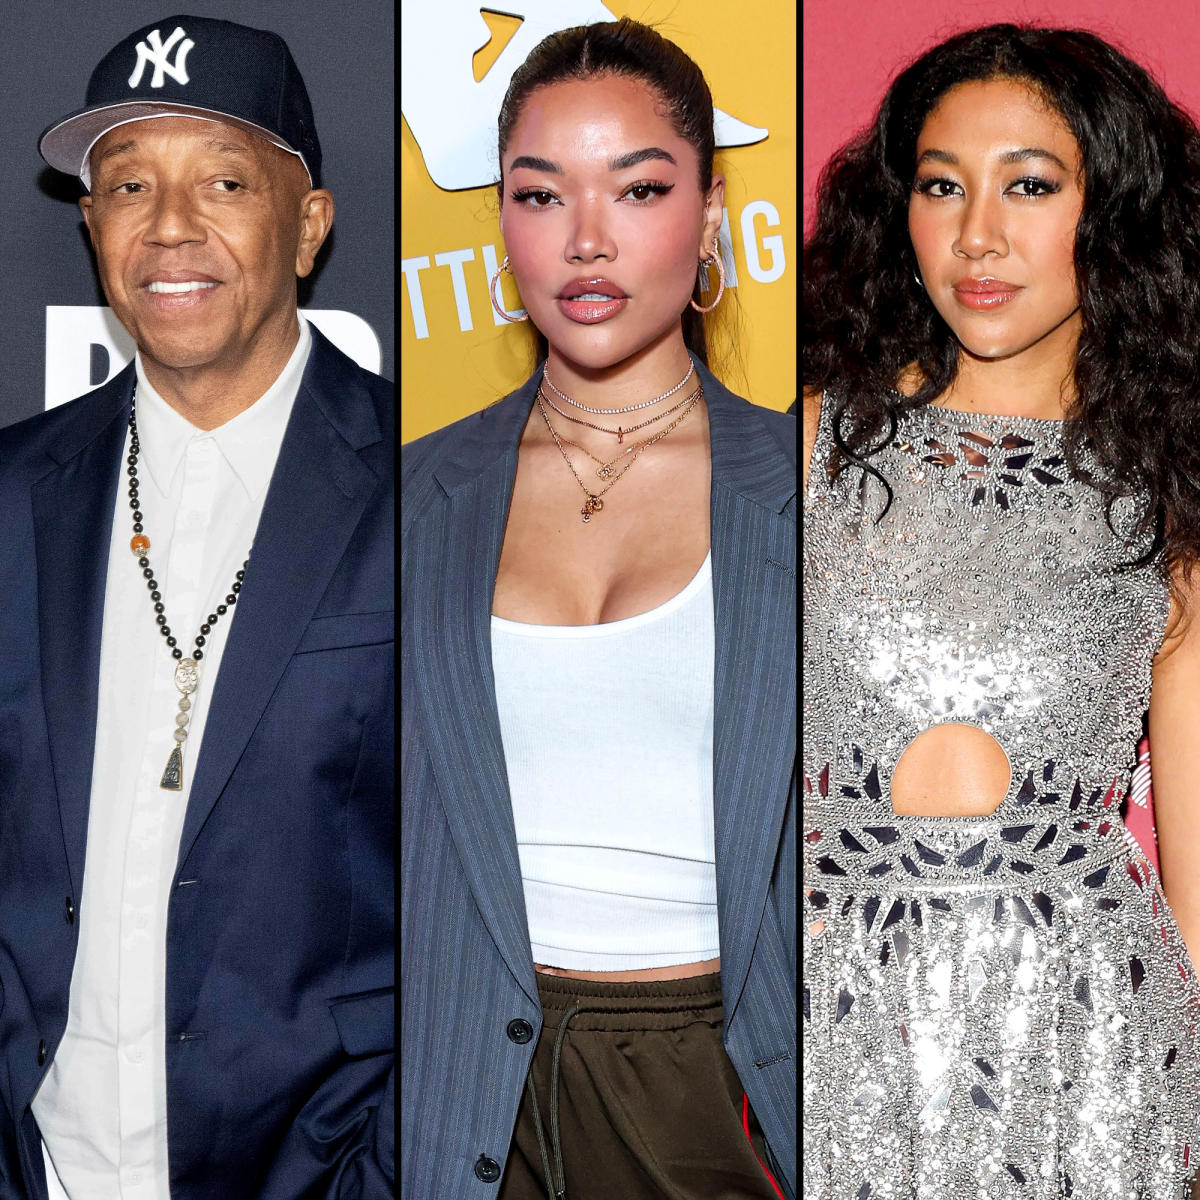 Russell Simmons Family Drama Explained: Harassment, Threats, and Tension, Oh My! 18